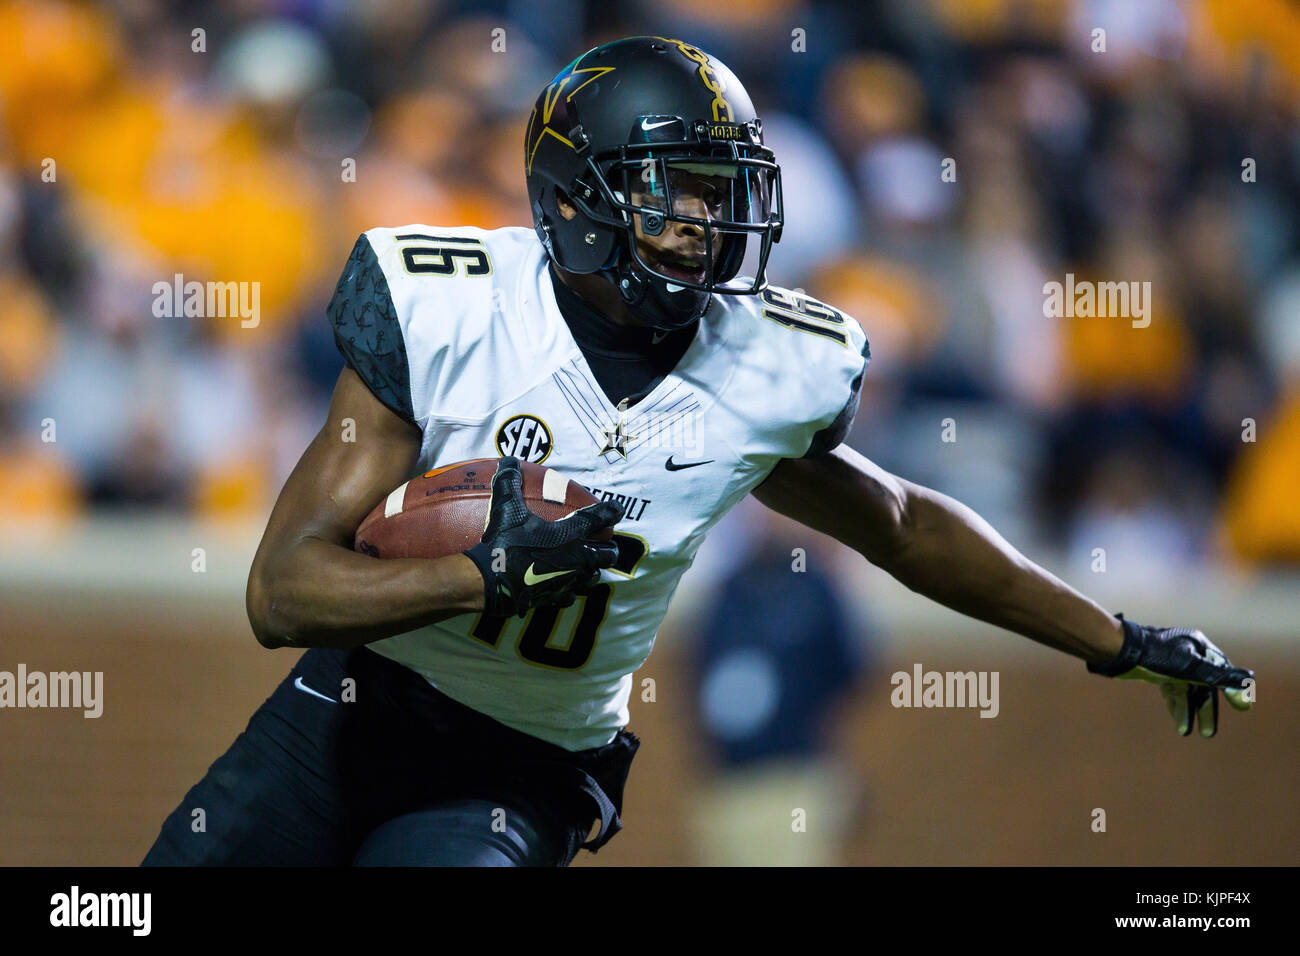 November 25, 2017: wide receiver Kalija Lipscomb #16 of the Vanderbilt Commodores returns a kick during the NCAA Football game between the University of Tennessee Volunteers and the Vanderbilt University Commodores at Neyland Stadium in Knoxville, TN Tim Gangloff/CSM Credit: Cal Sport Media/Alamy Live News Stock Photo